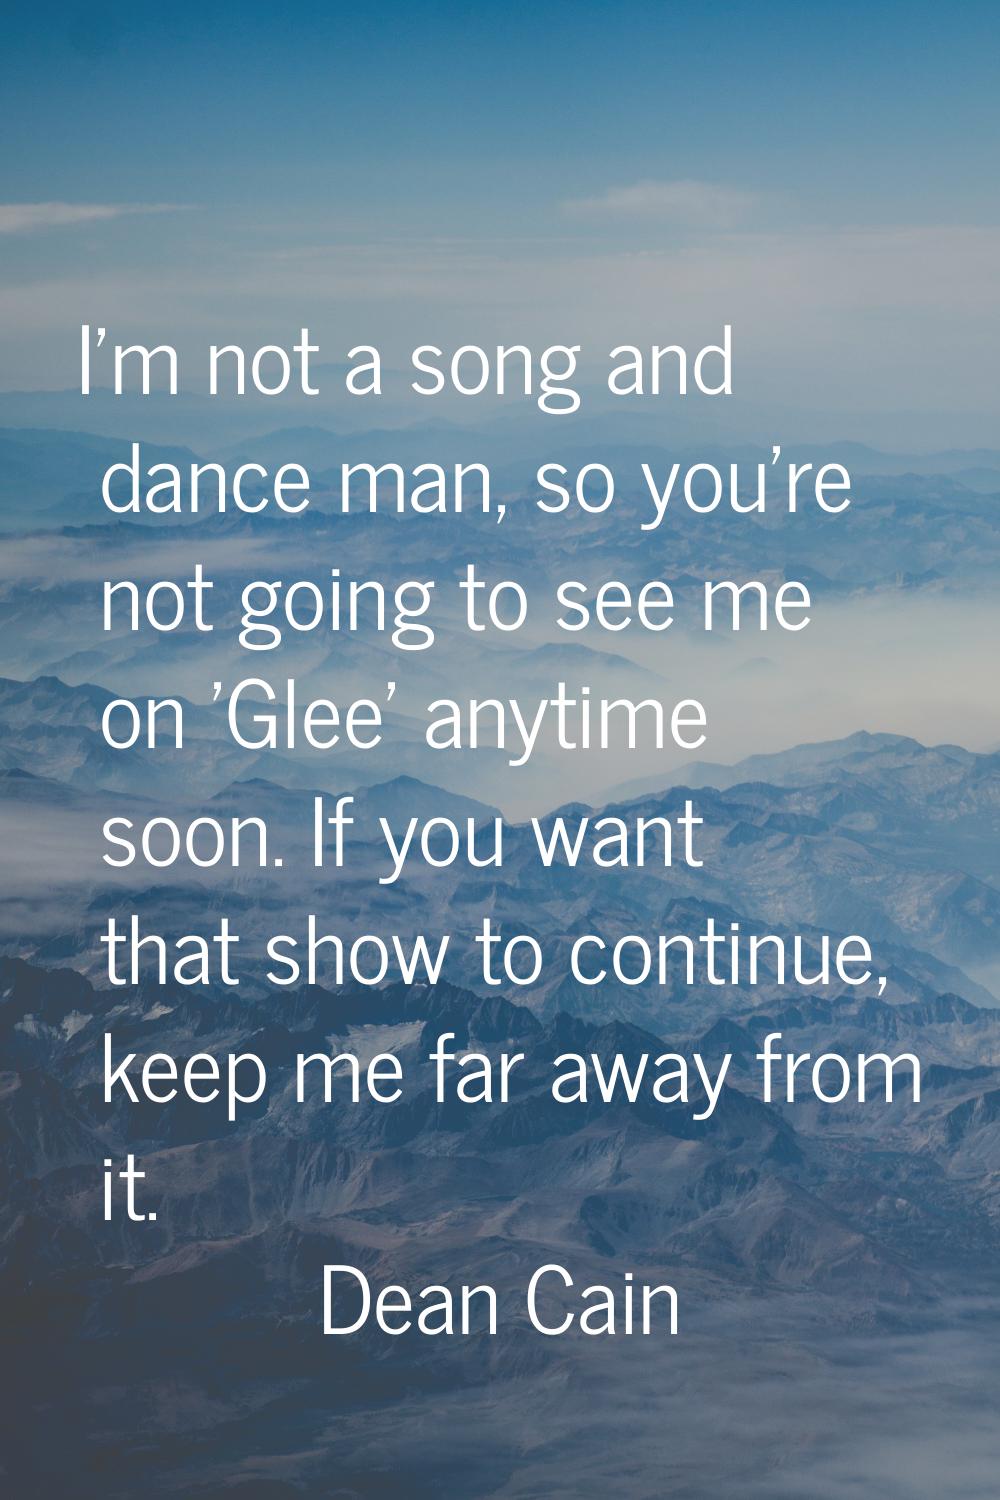 I'm not a song and dance man, so you're not going to see me on 'Glee' anytime soon. If you want tha